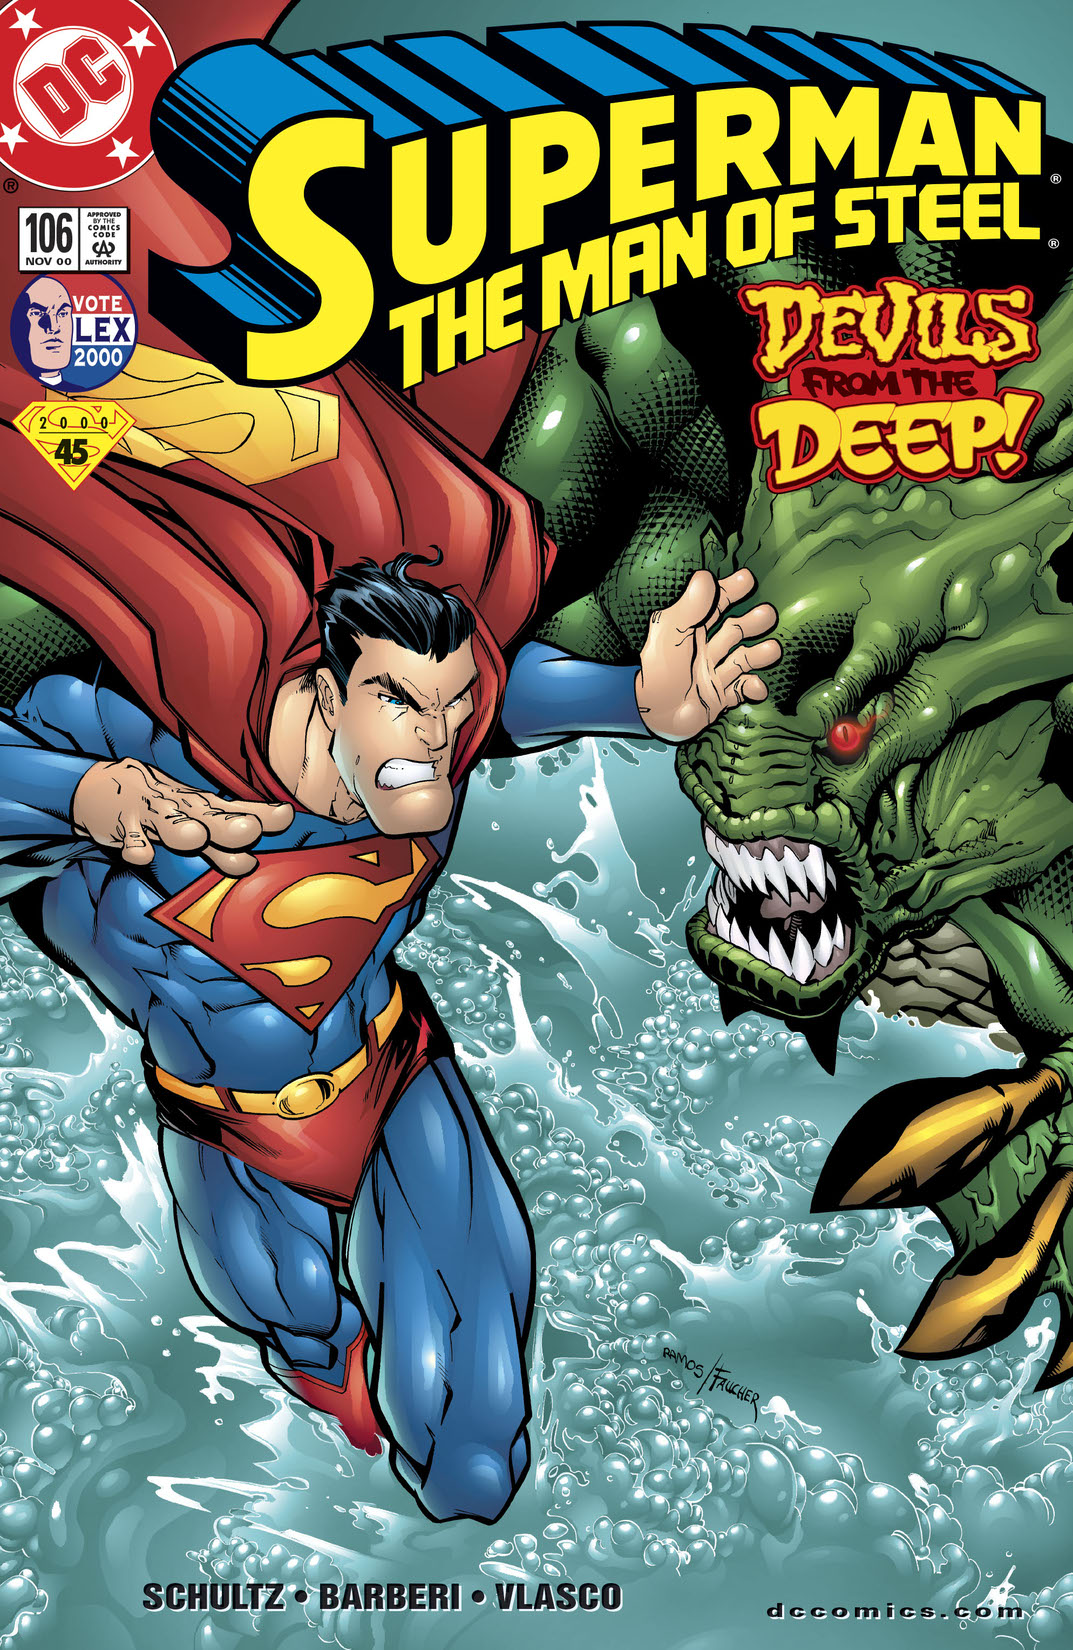 Superman: The Man of Steel #106 preview images